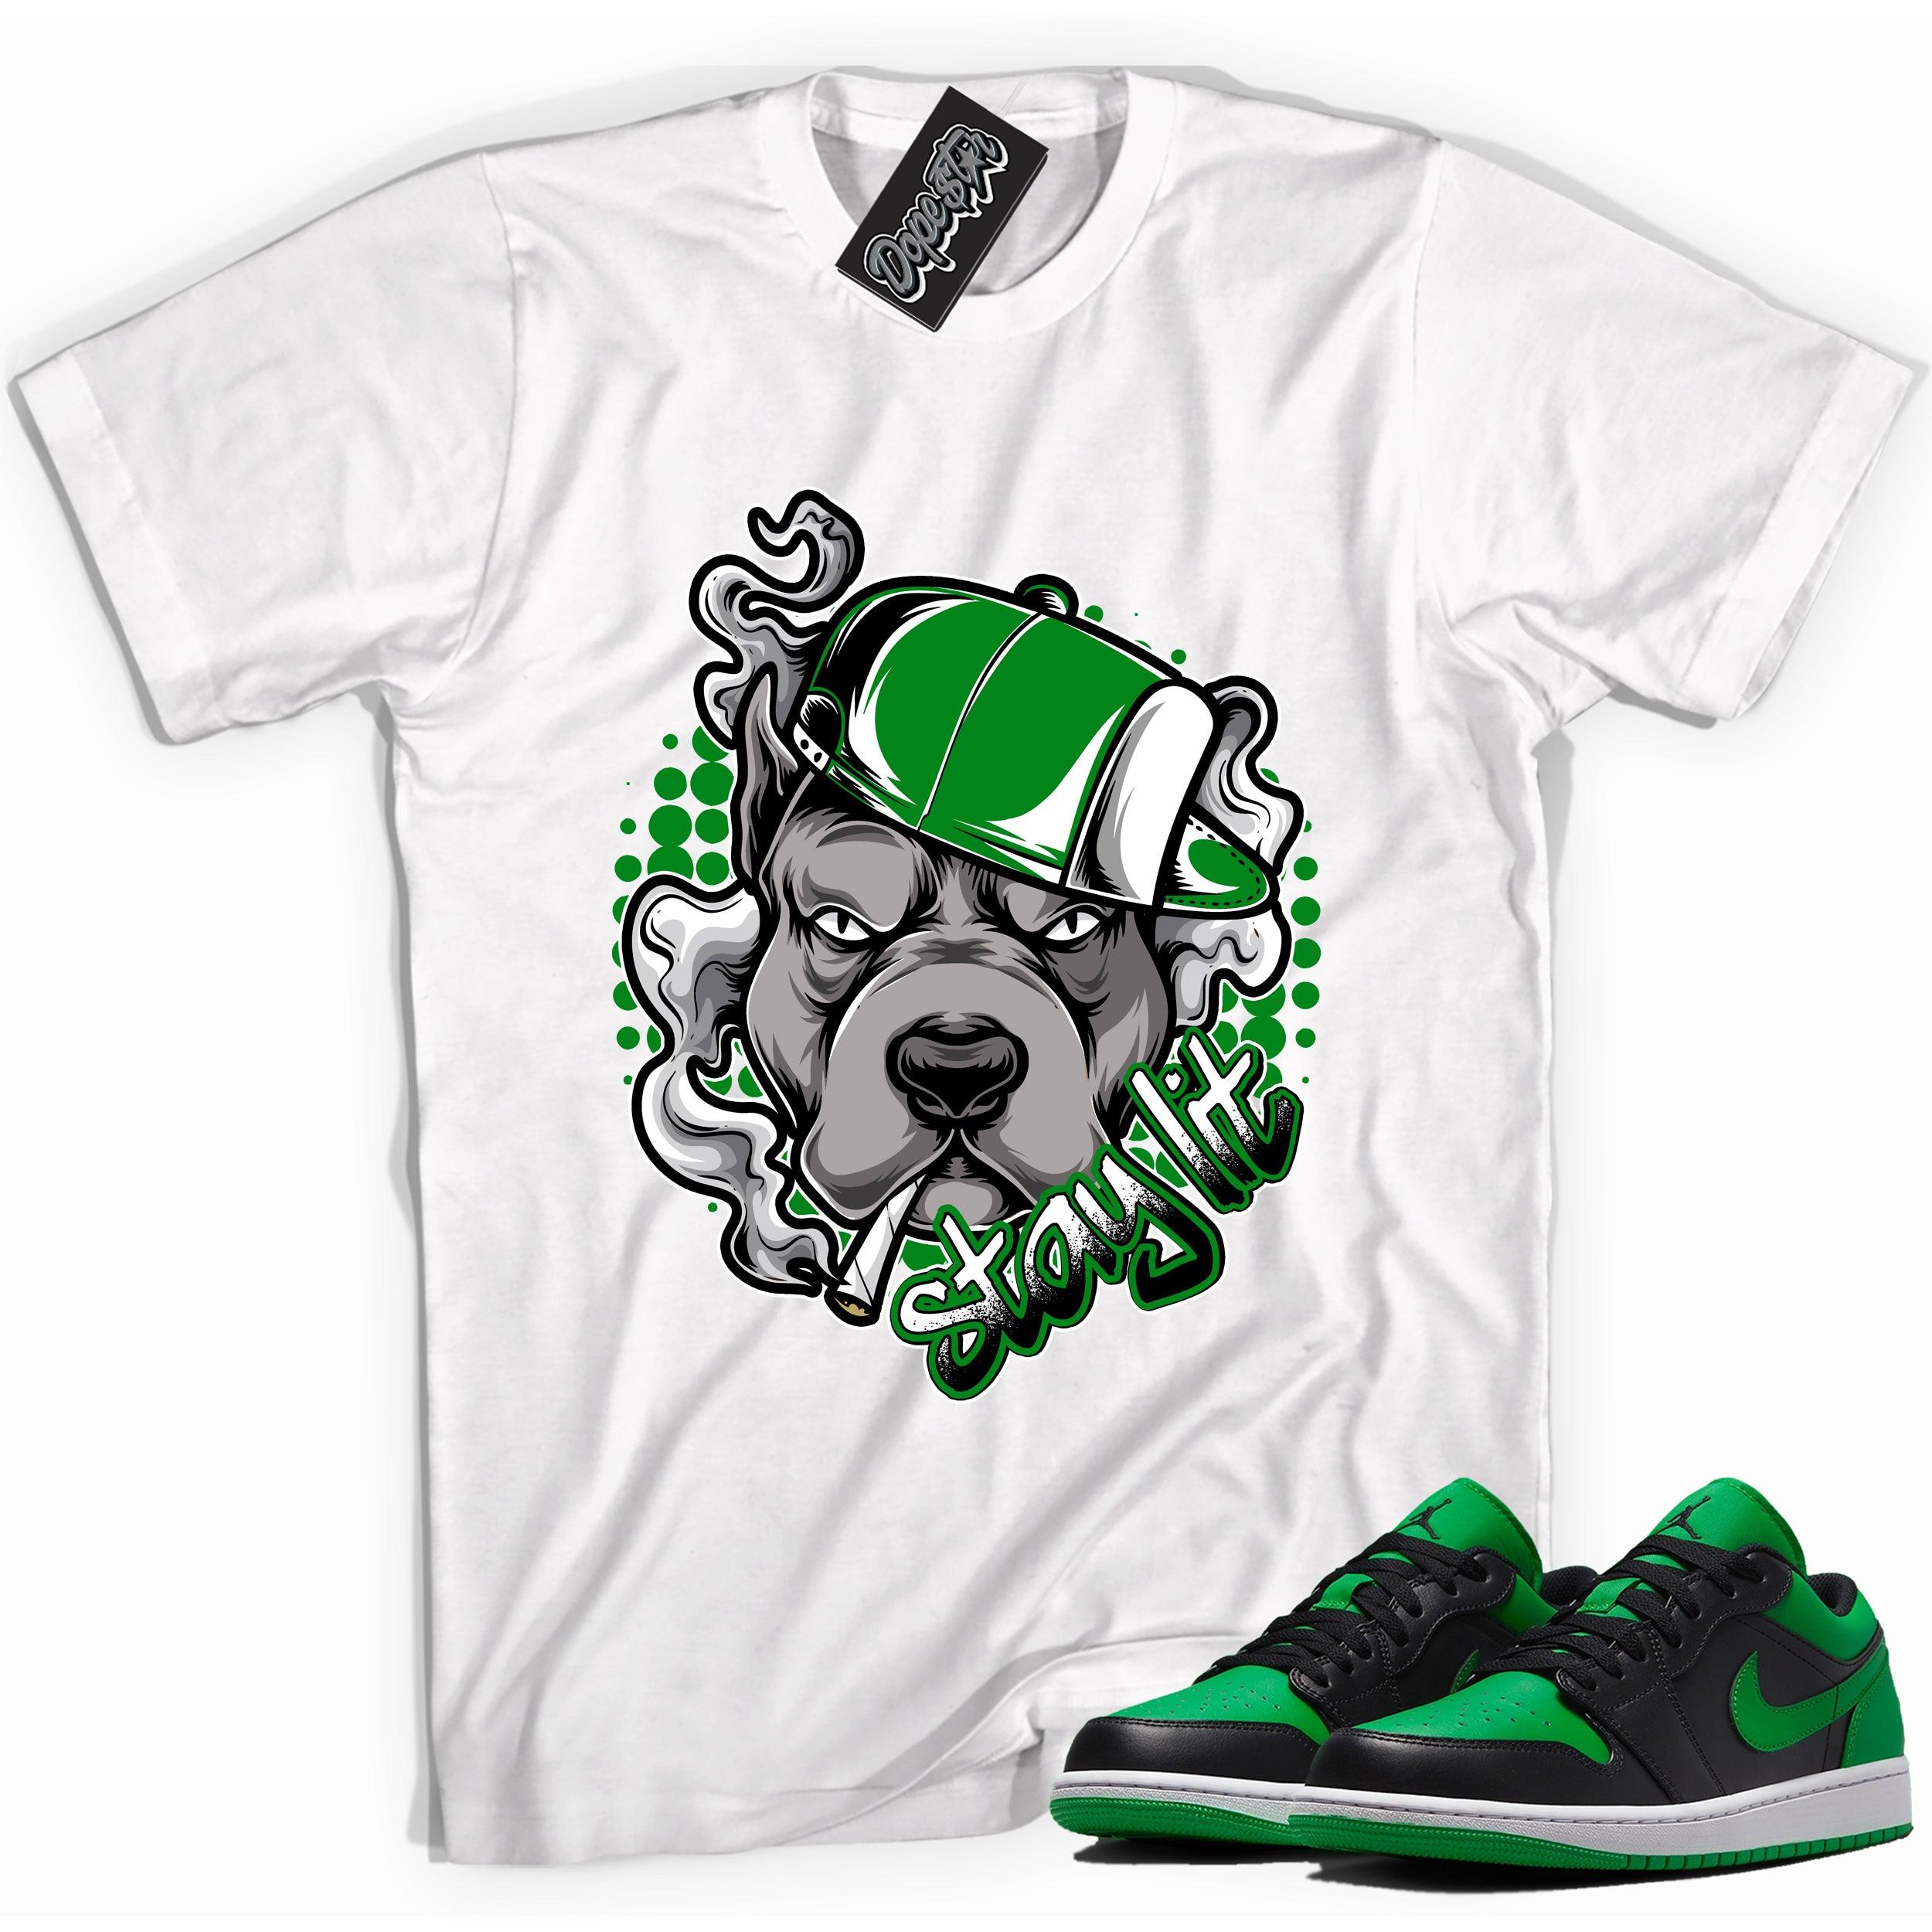 Cool white graphic tee with 'stay lit' print, that perfectly matches Air Jordan 1 Low Lucky Green sneakers